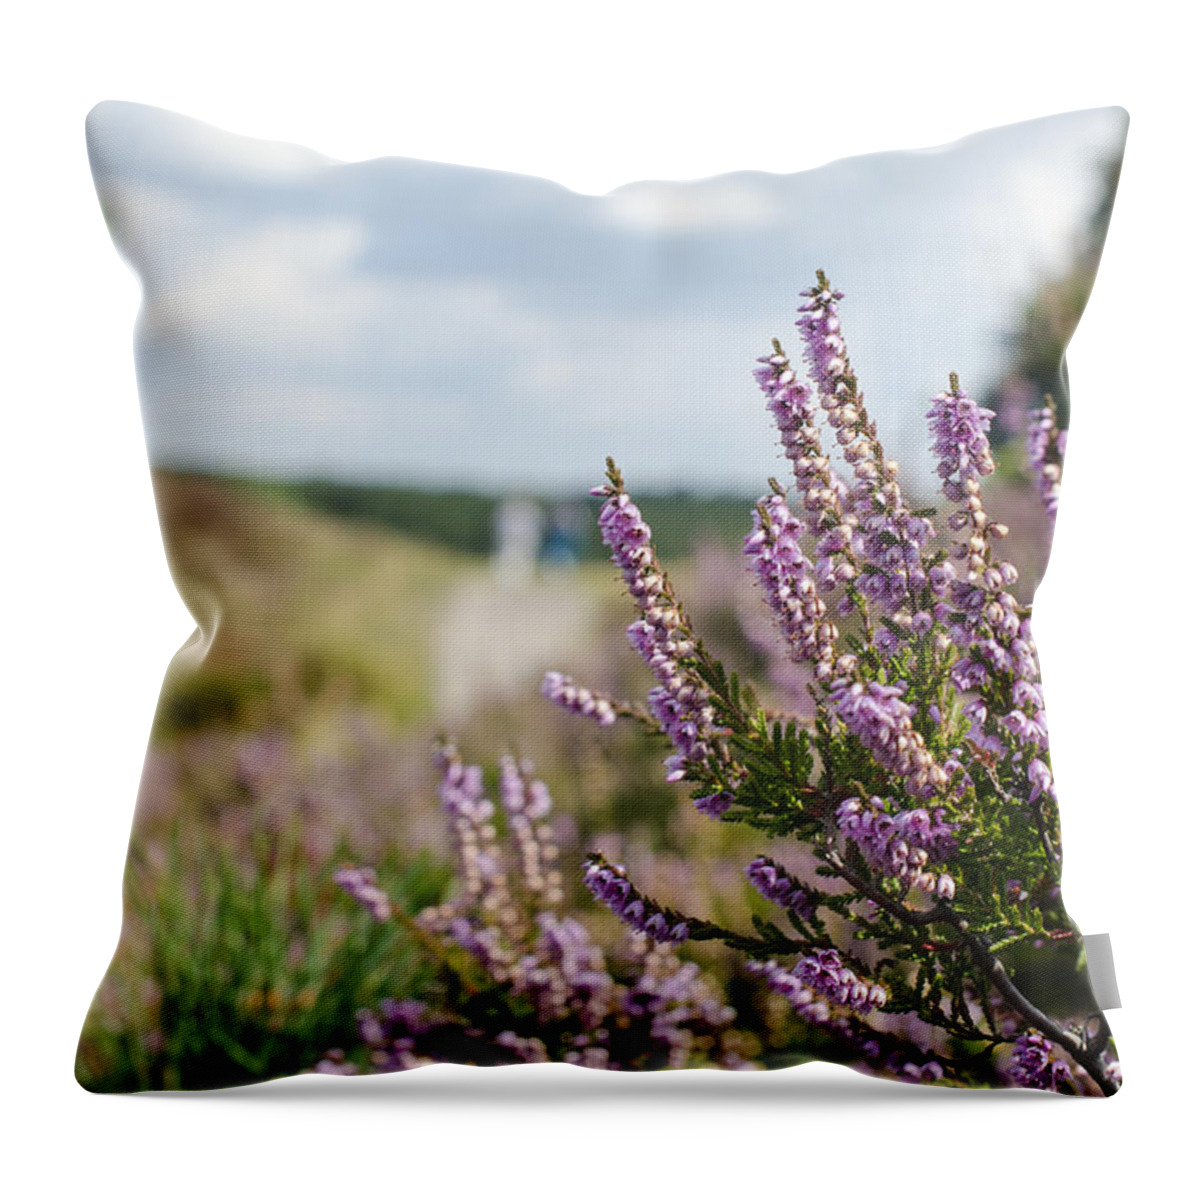 Pink Throw Pillow featuring the photograph Heather by Rainer Kersten